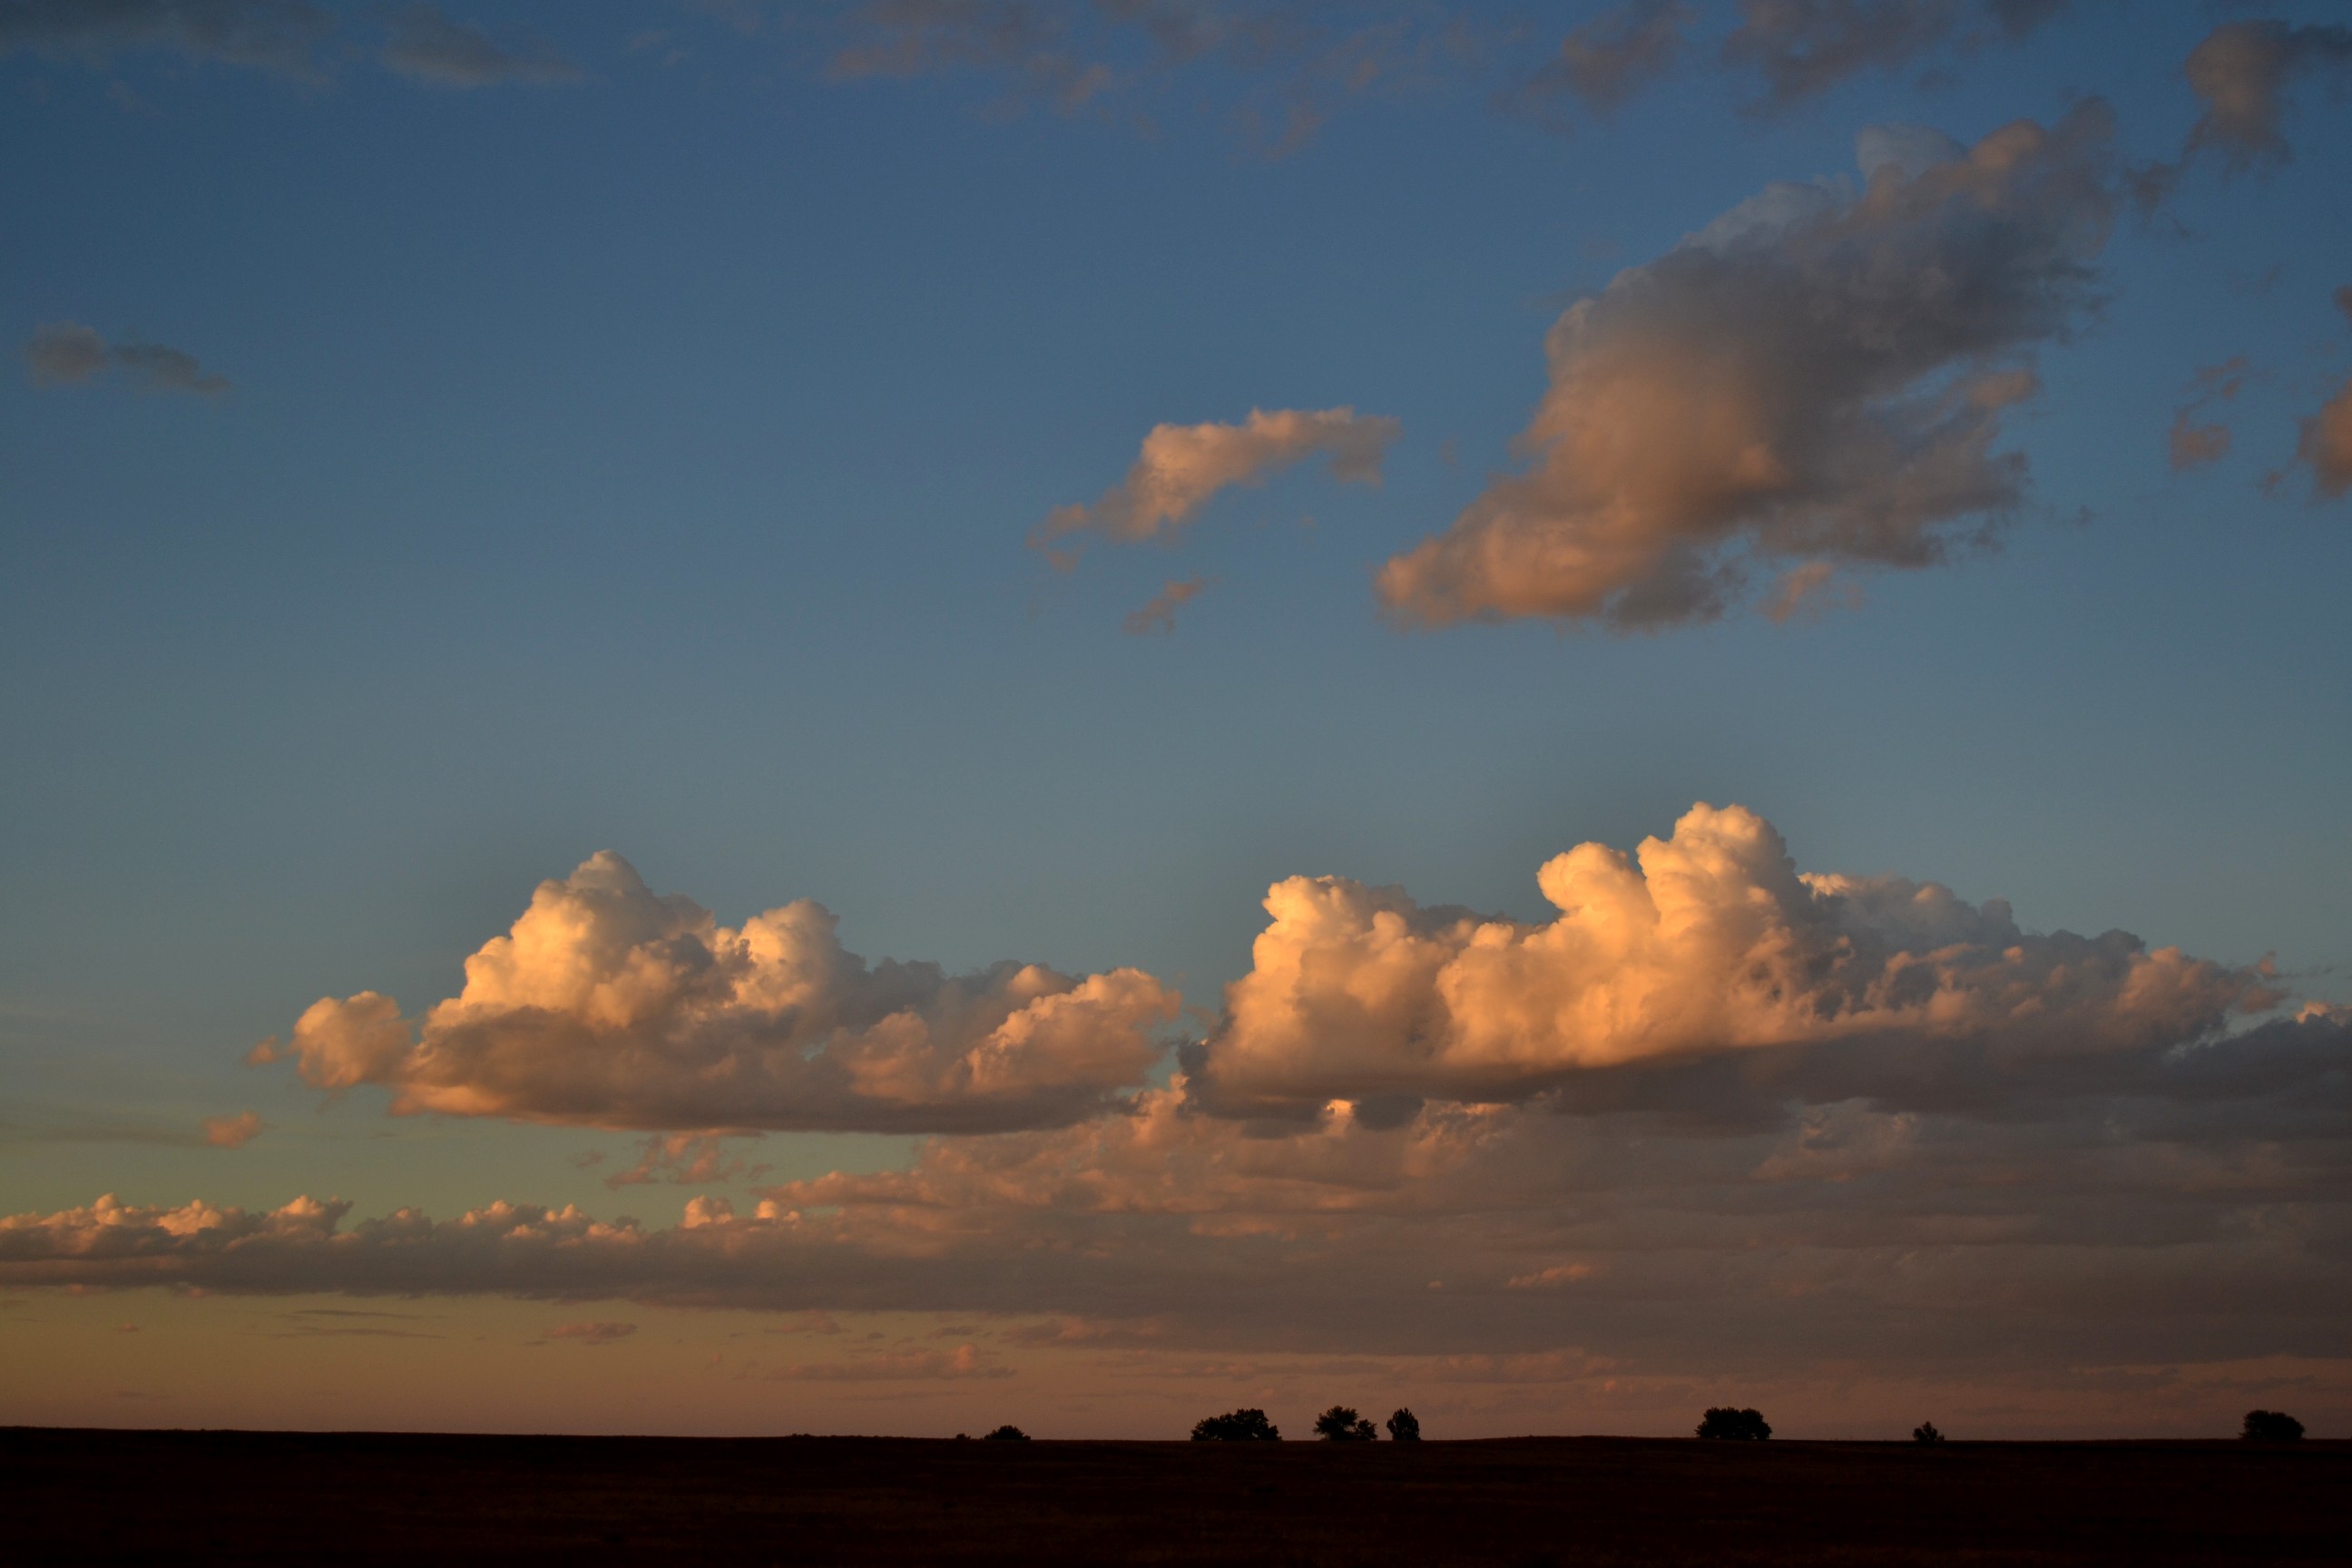 Vibrant & Stormy Sunset Clouds, 2011-08-29 - Sunsets | Colorado ...